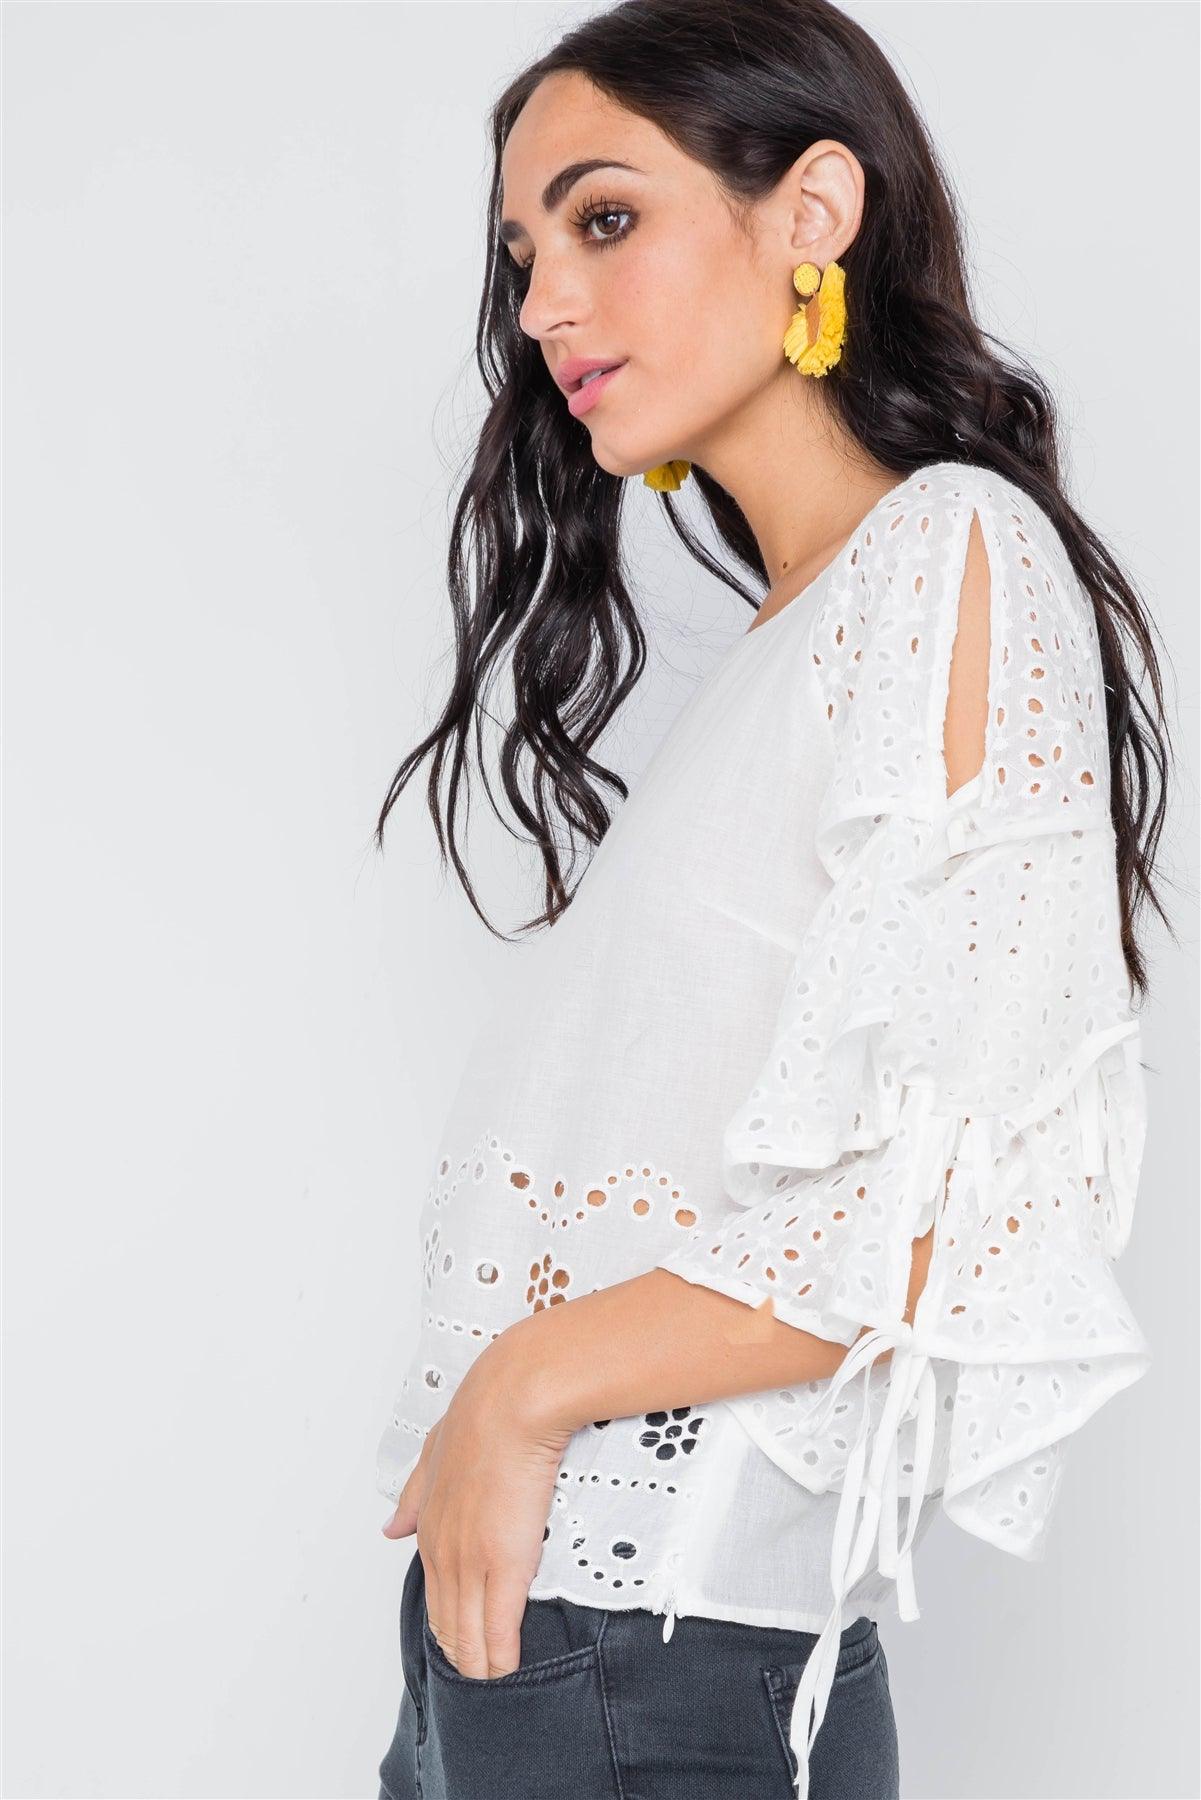 White Floral Embroidery Cut Out Flounce Sleeve Top /2-2-2